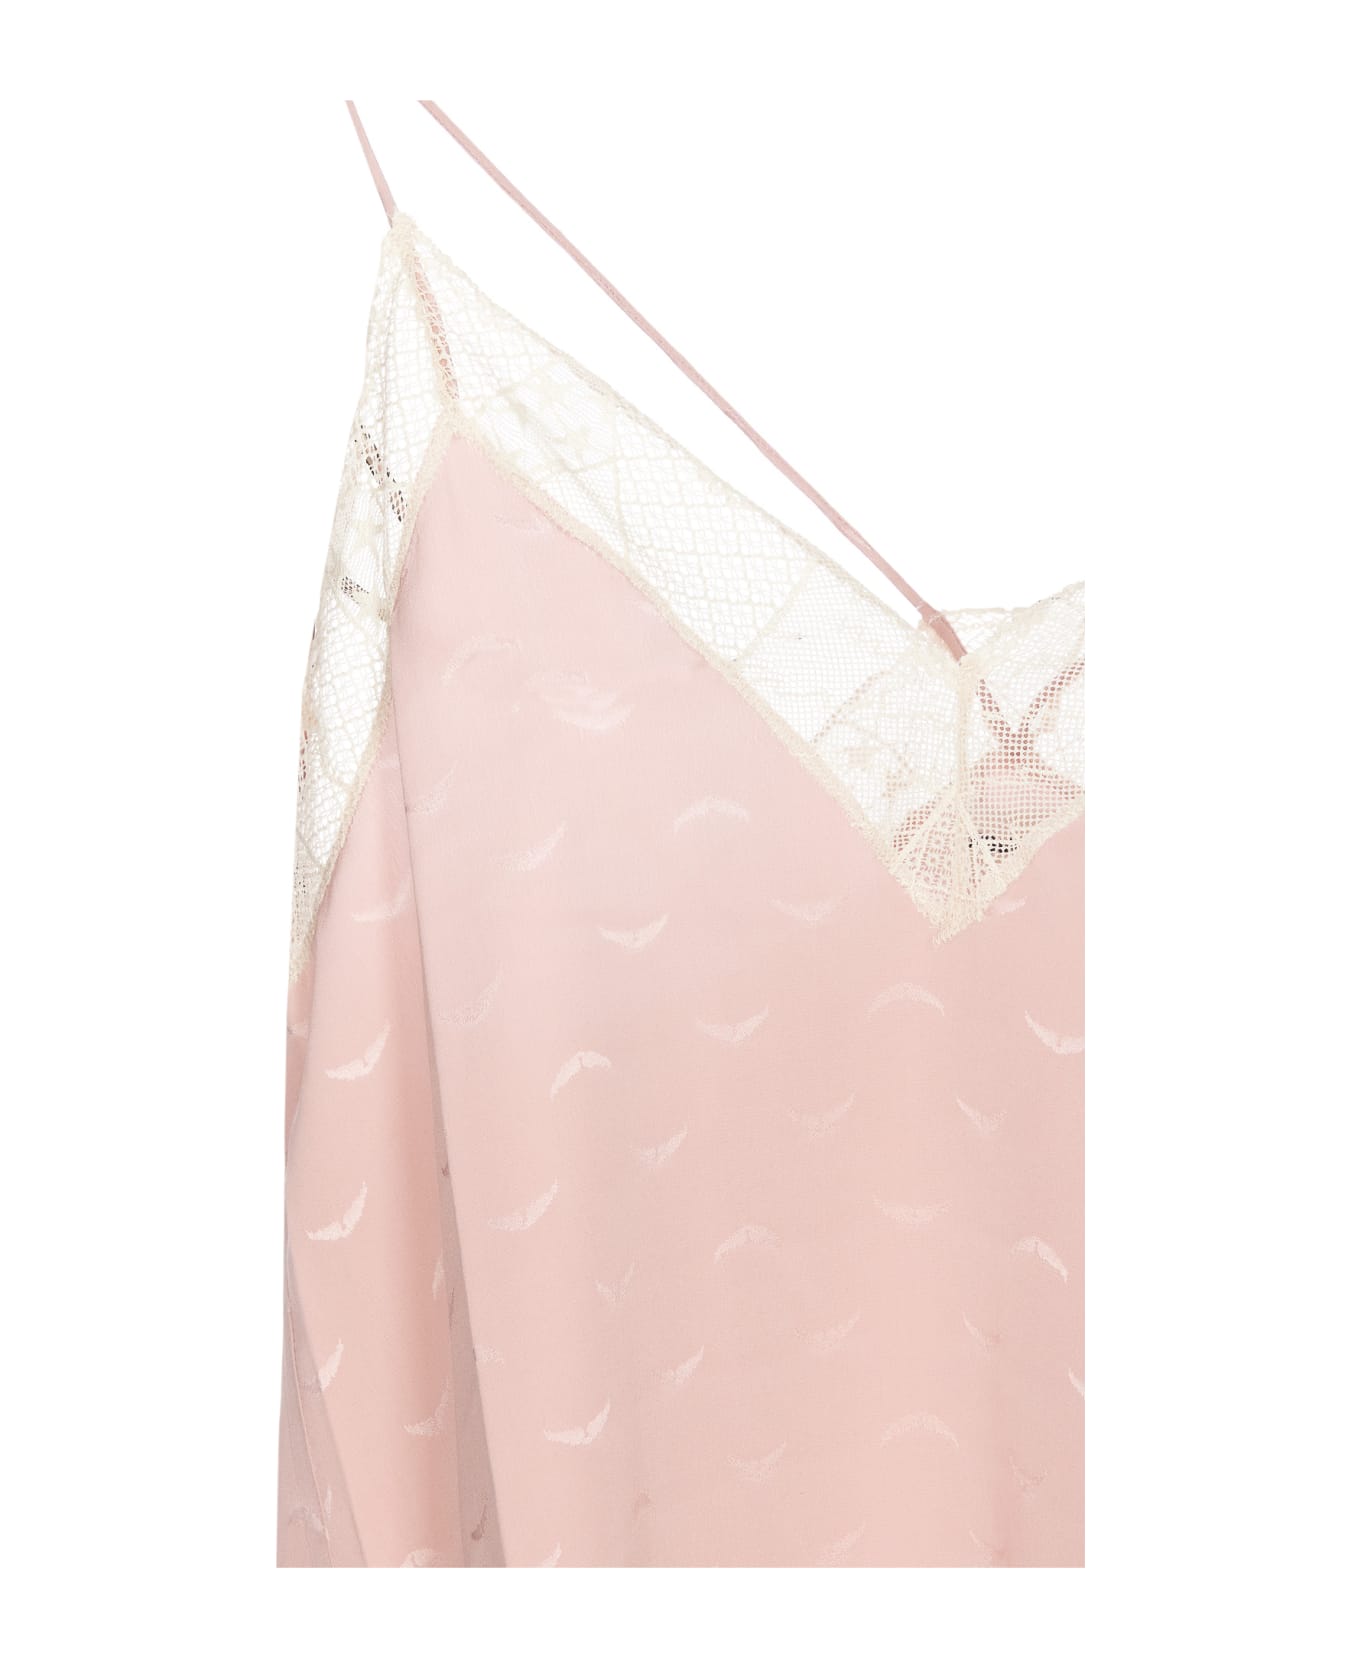 Zadig & Voltaire Christy Jac Wings Tank Top - Pink